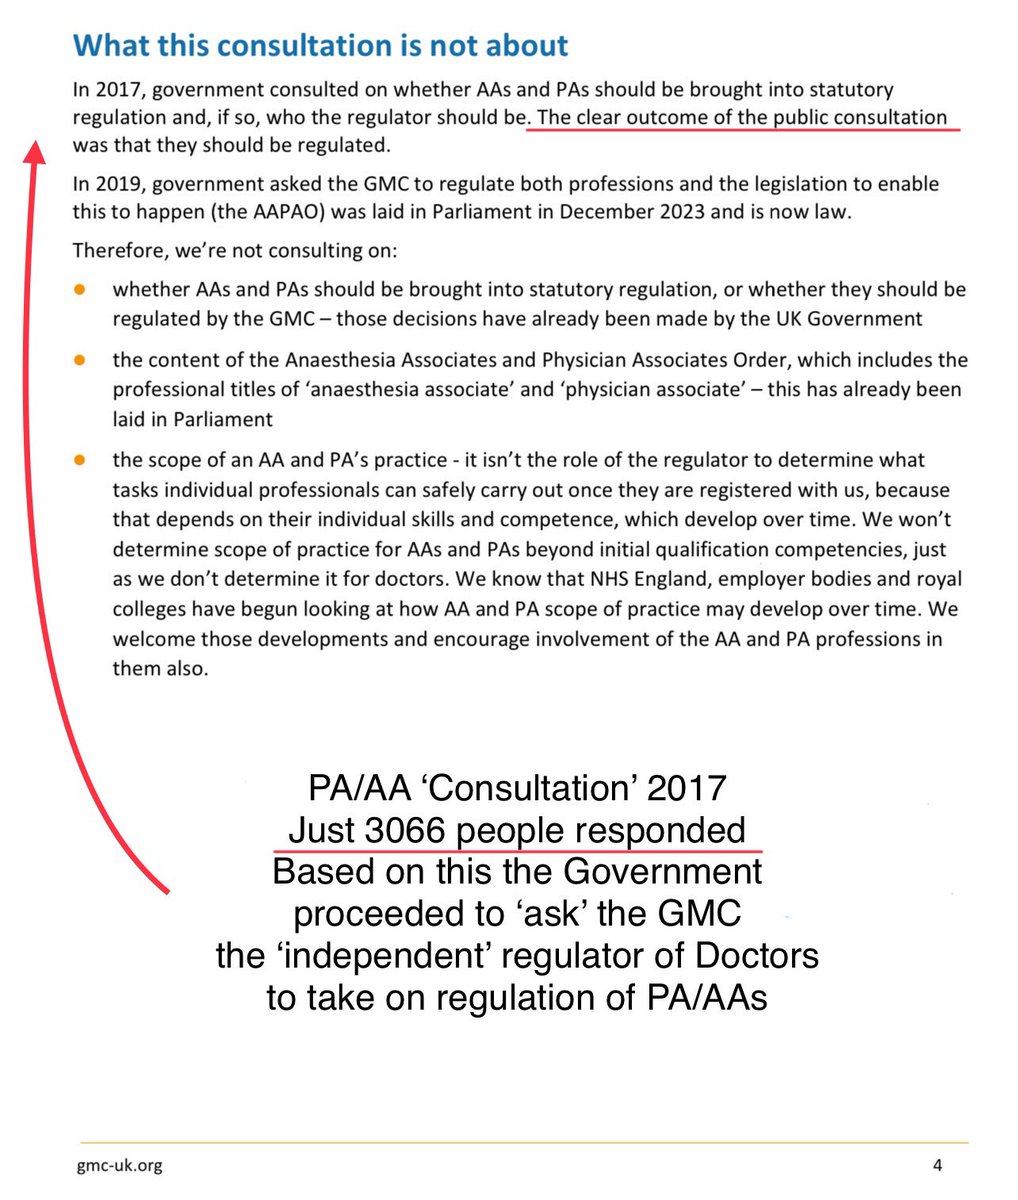 The consultation failed to address the most immediate & important issues around PAs/AAs. It will largely be a rubber stamping exercise despite no agreement from Doctors & the public that the GMC is the right place for regulation. Govt/GMC/NHSE leadership is failing the public.